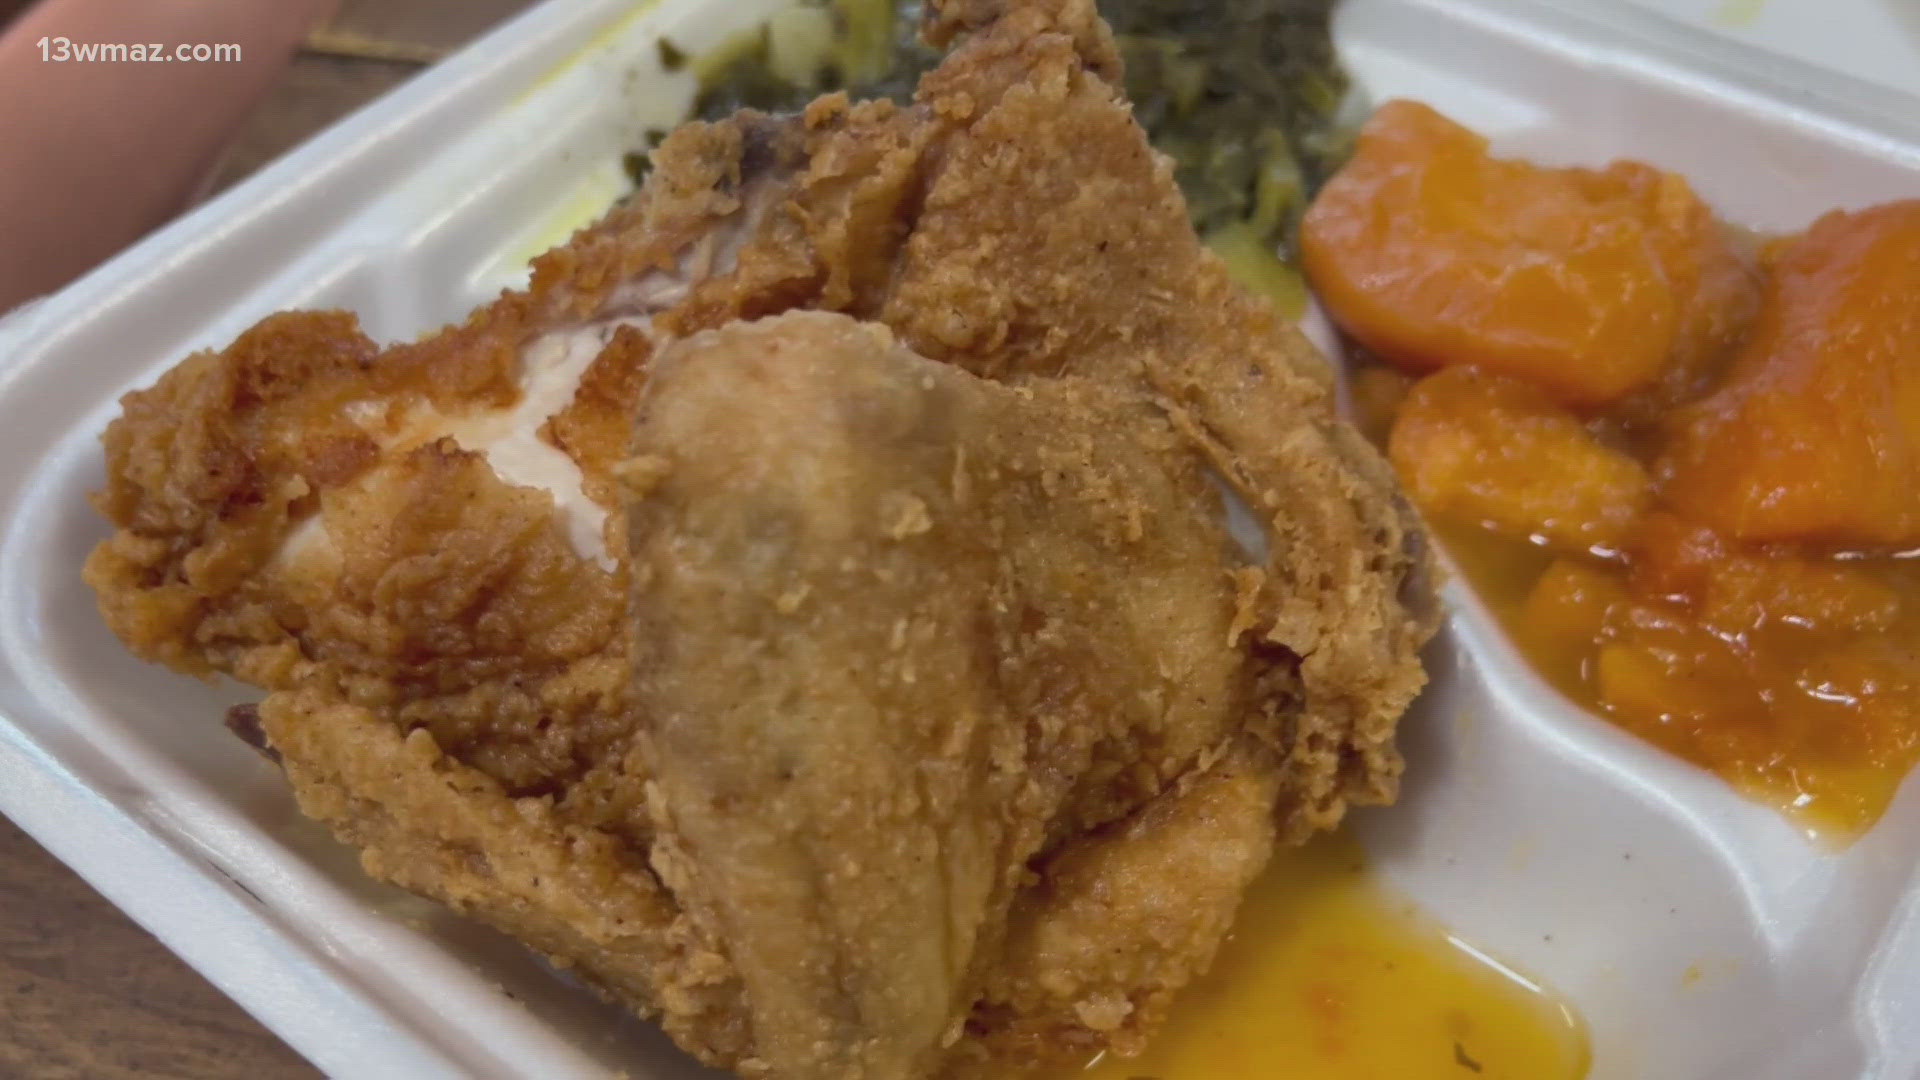 Dawson's Kitchen has been serving Macon for several years now, and lots of folks line up to get a plate of fried chicken.